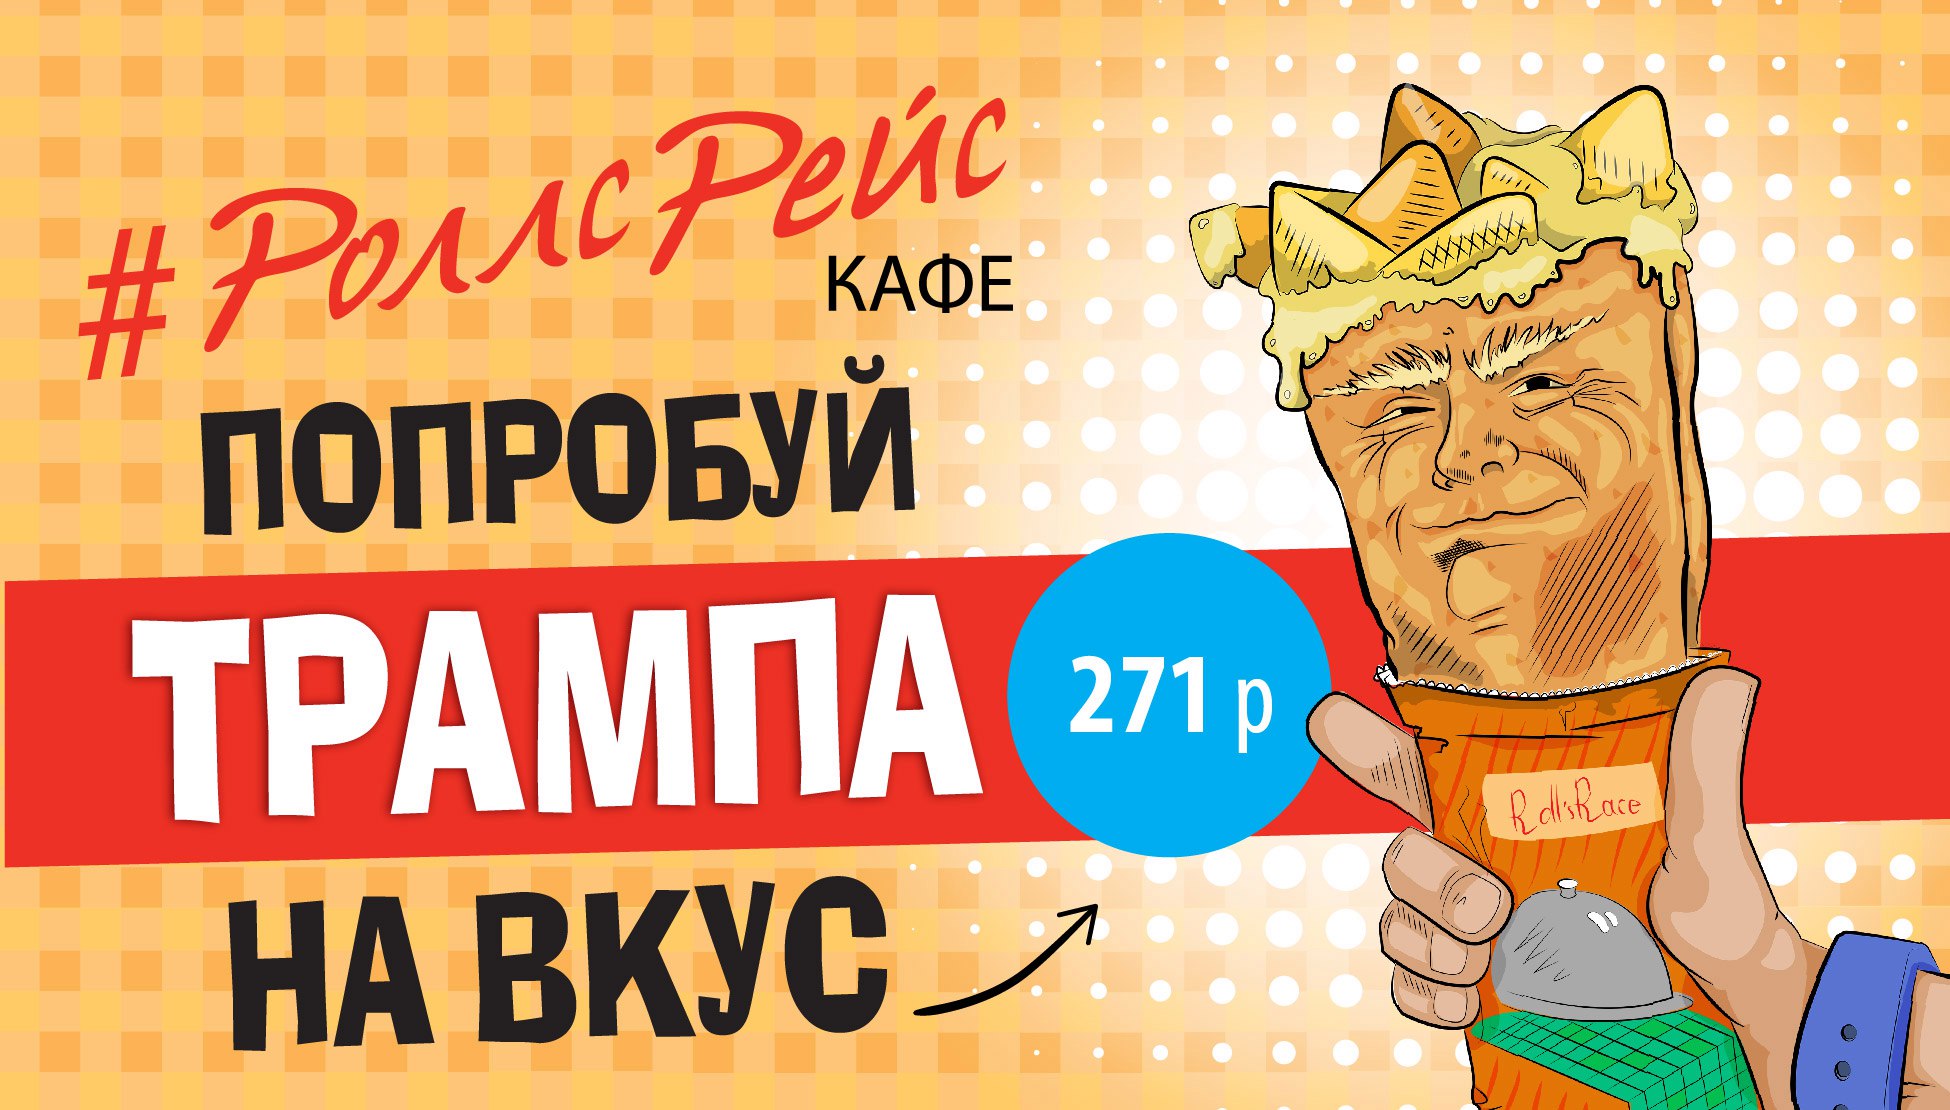 Ad for the Trump wrap. Image: Rolls Race/VK